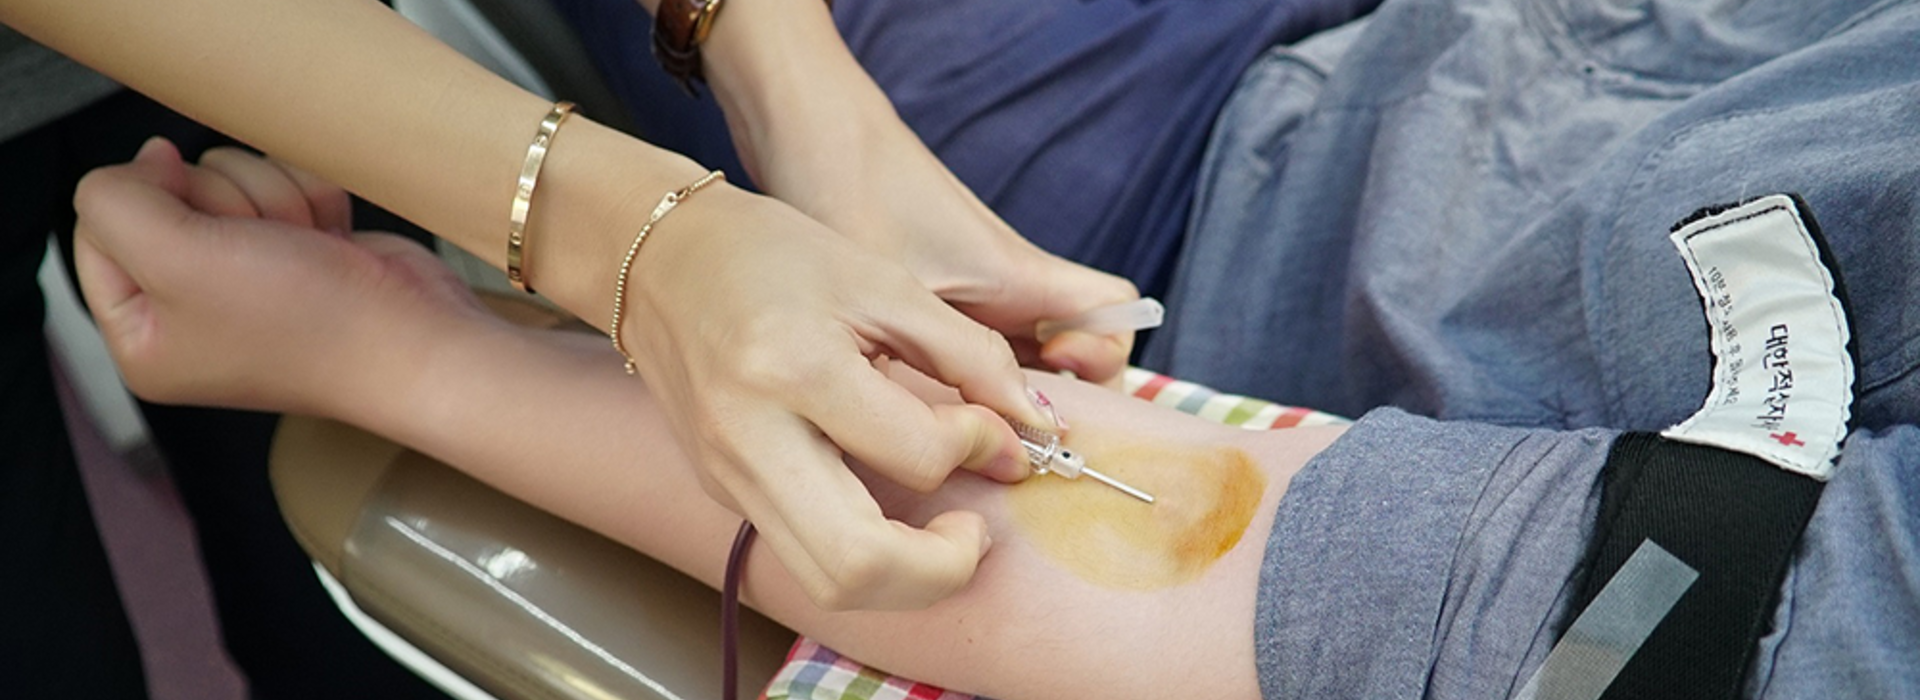 A close-up of an arm while they give plasma